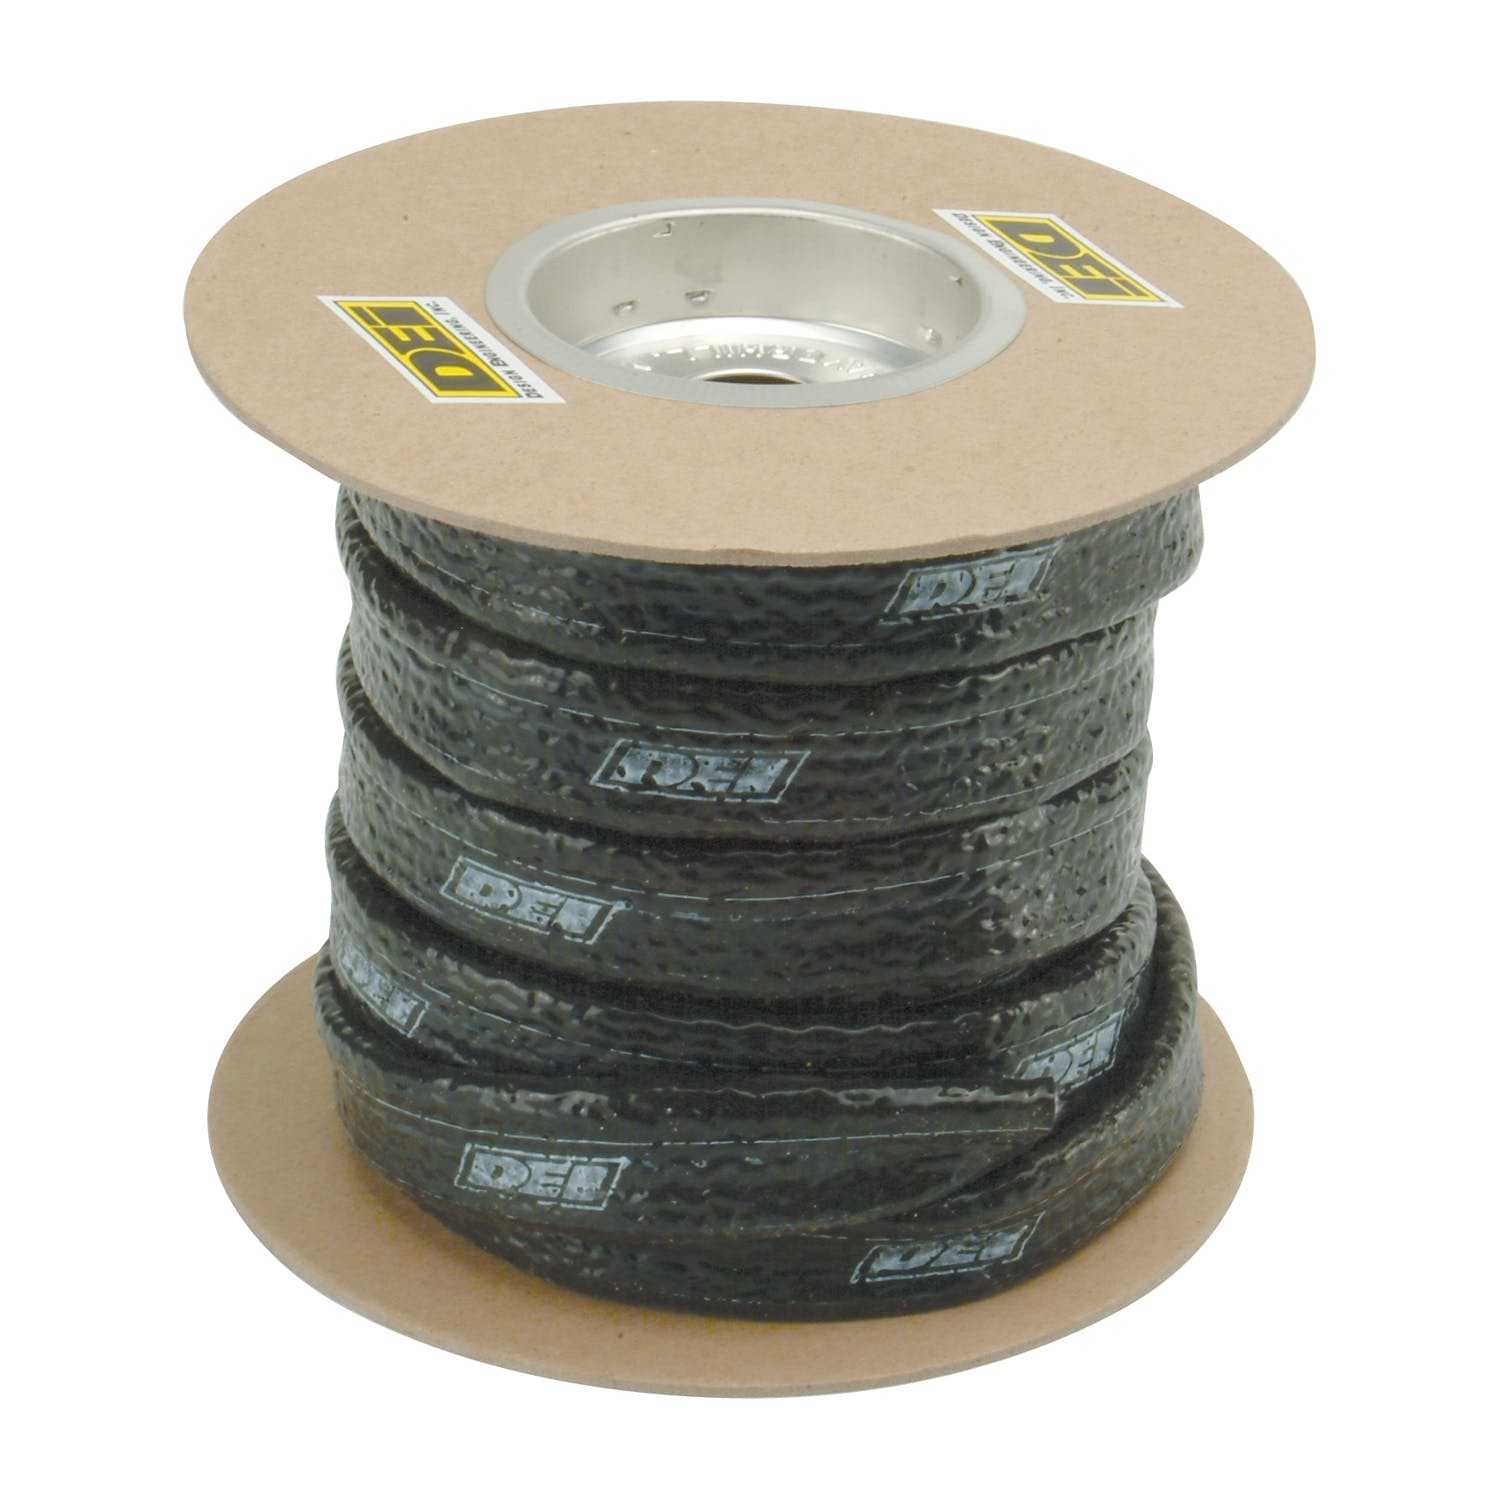 Design Engineering, Inc. 91472 Fire Sleeve 5/8 I.D. - Bulk per foot (Fire Tape not included)